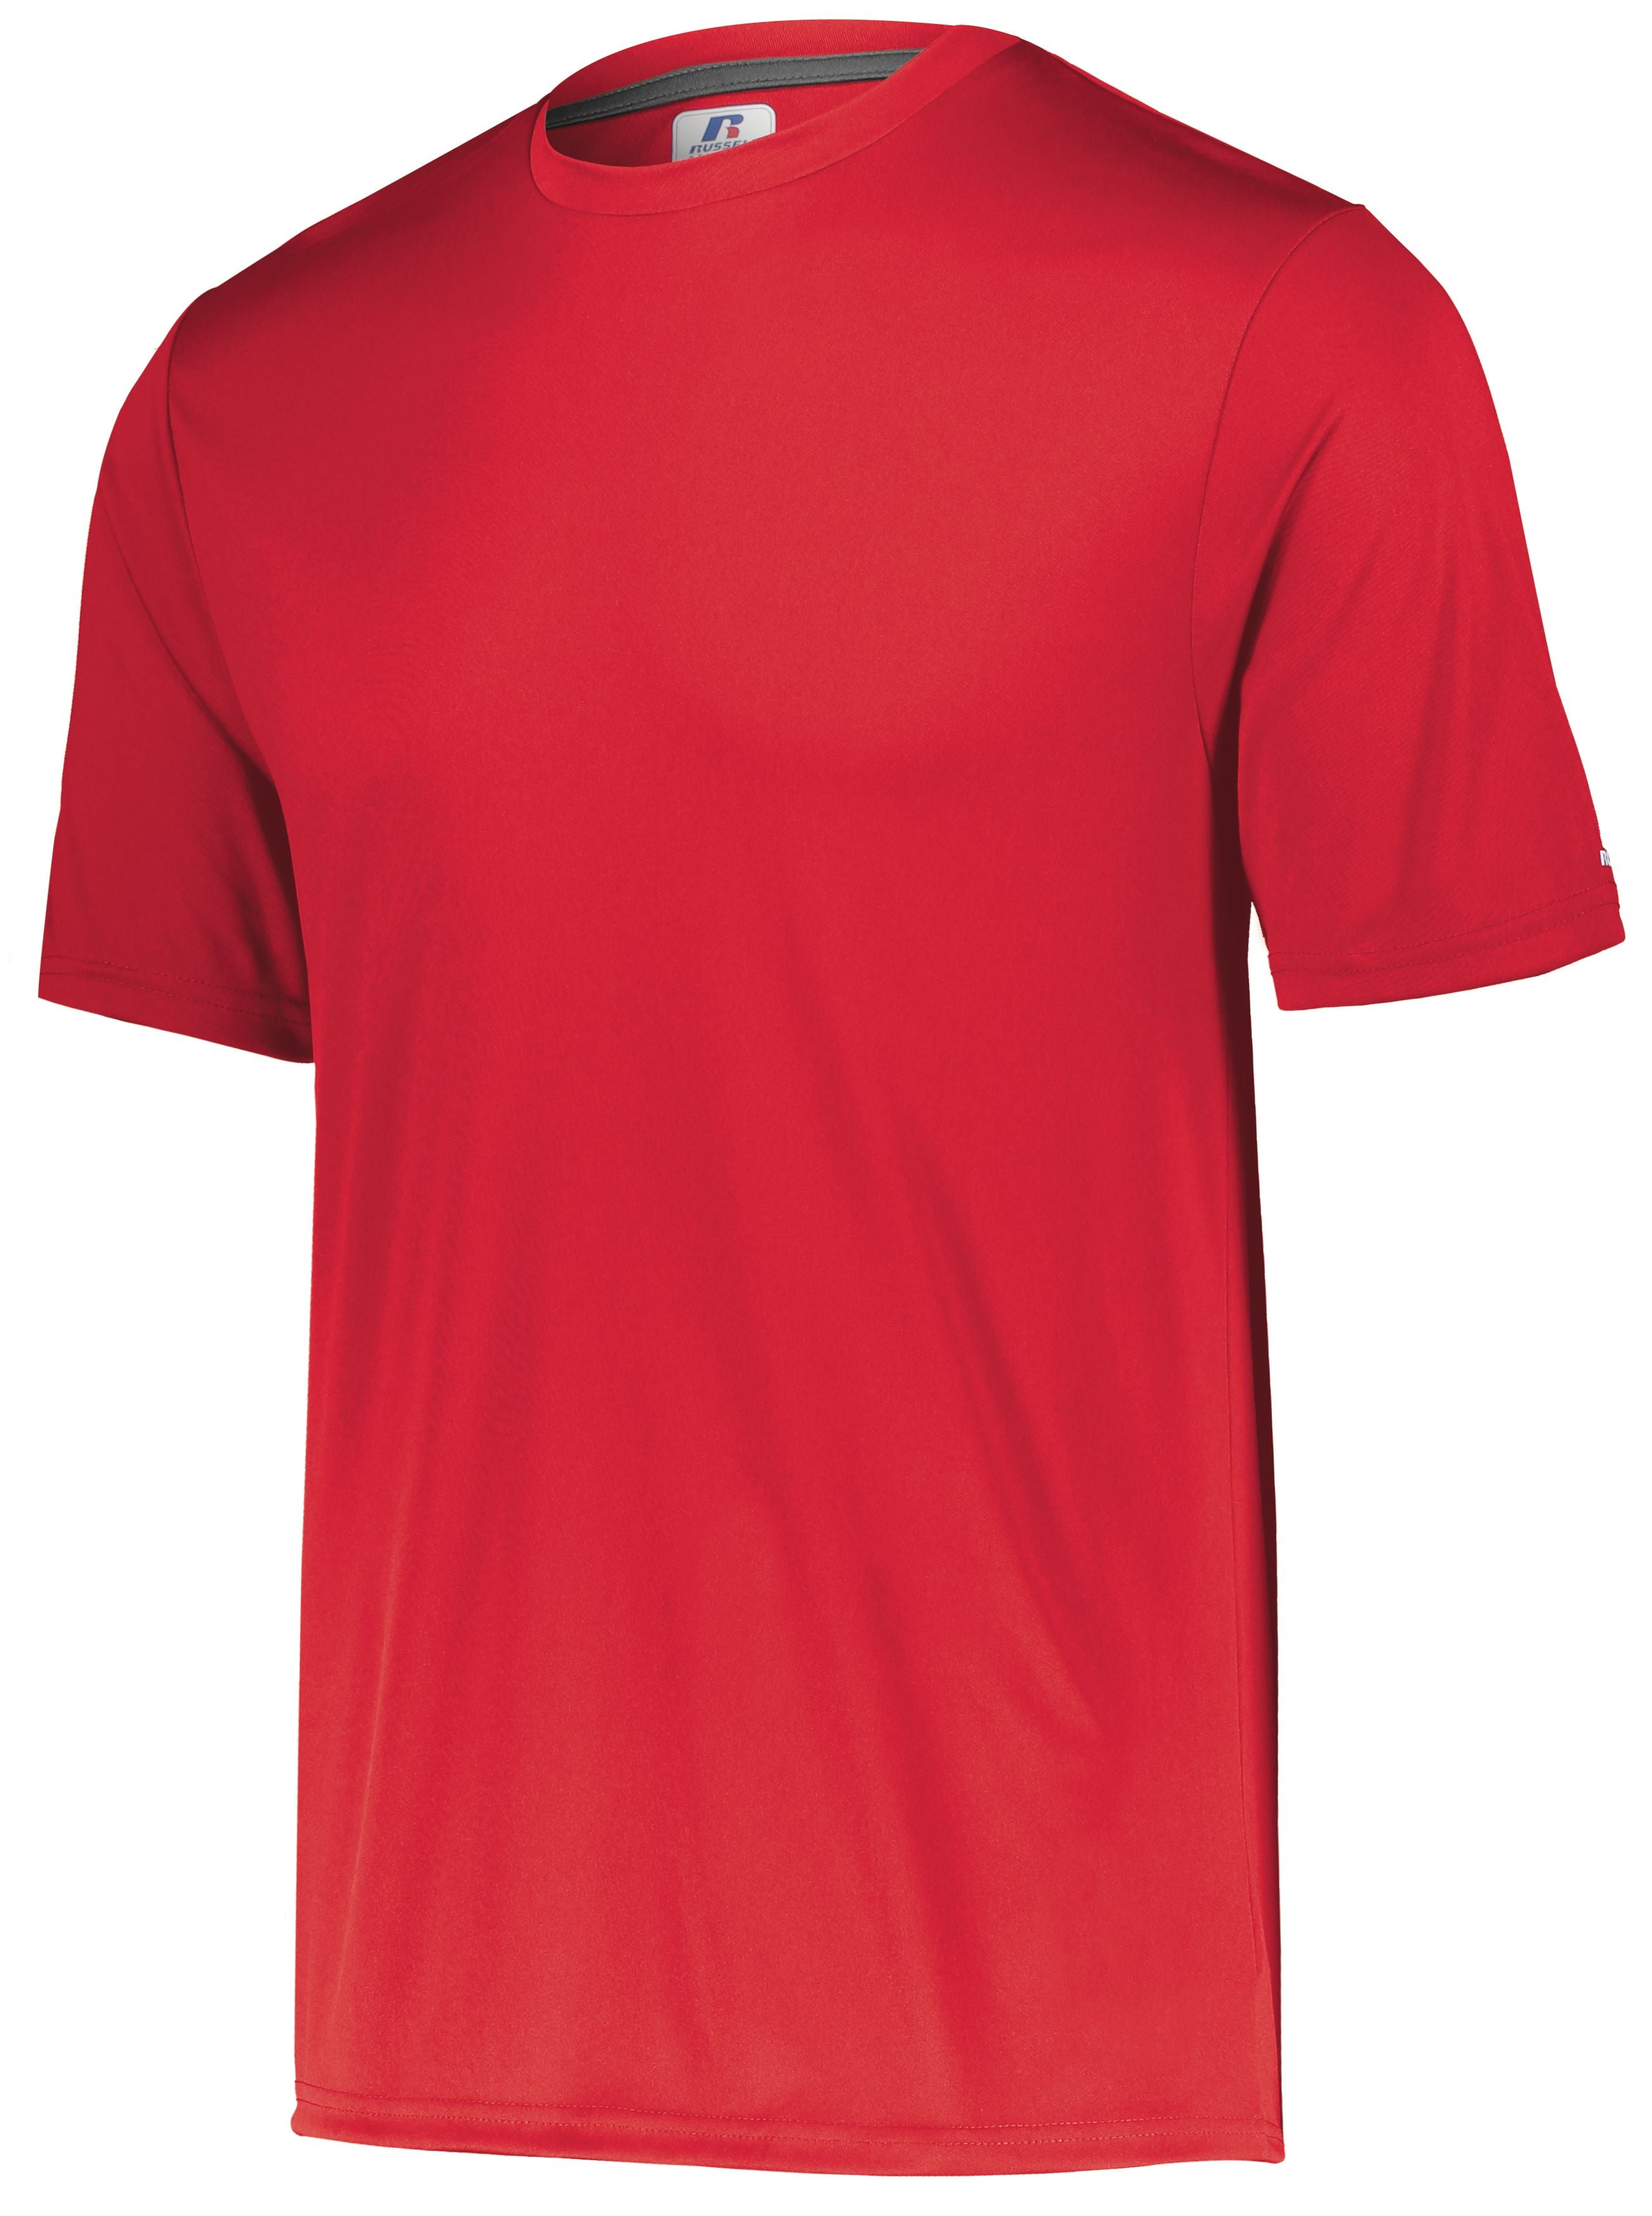 Russell Athletic Dri-Power Core Performance Tee in True Red  -Part of the Adult, Adult-Tee-Shirt, T-Shirts, Russell-Athletic-Products, Shirts product lines at KanaleyCreations.com